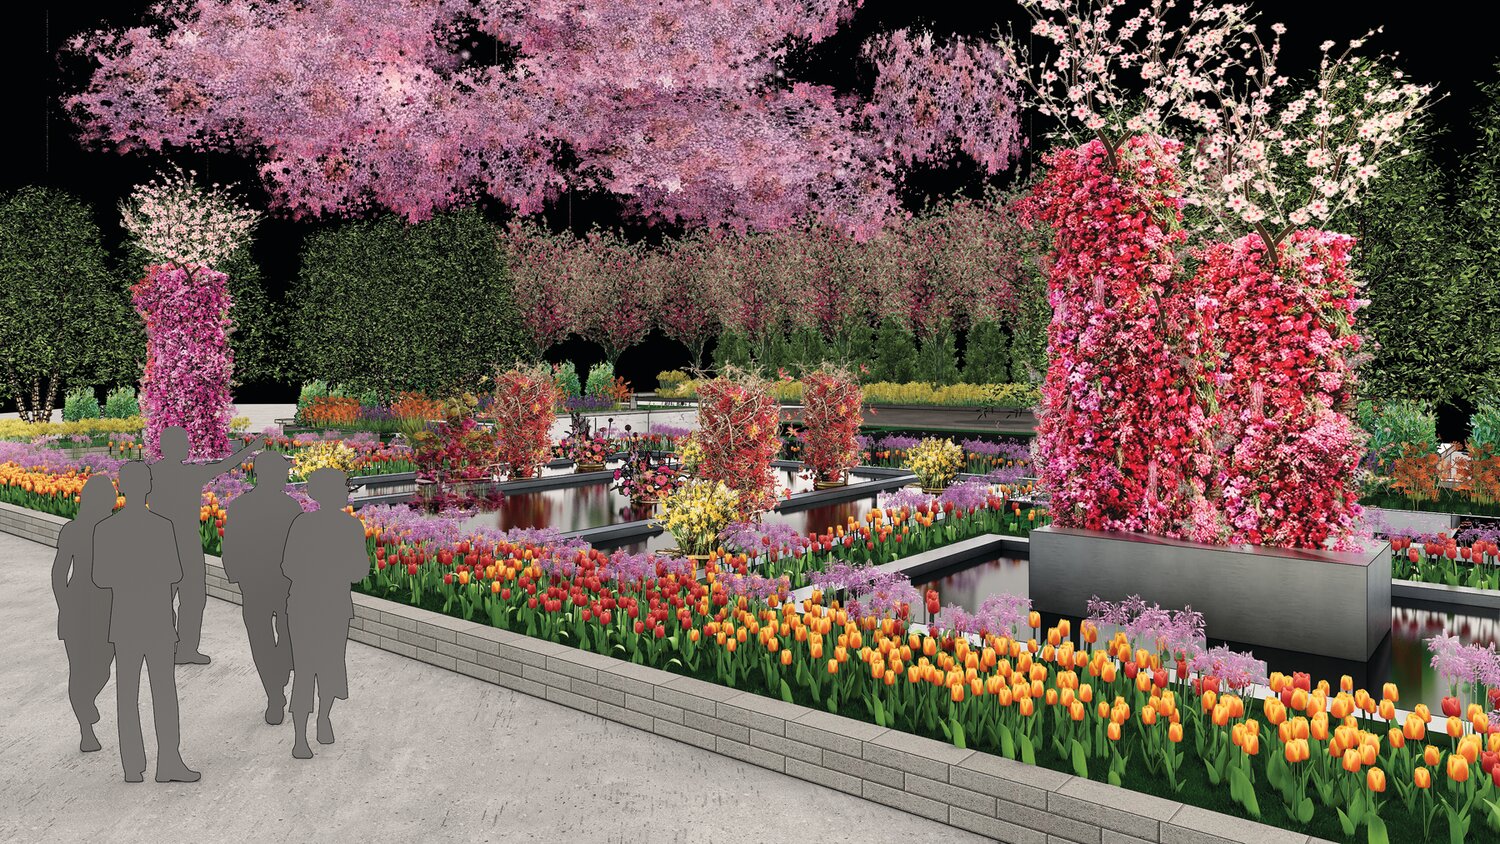 According to a statement, the PHS Entrance Garden at the Flower Show “will captivate with its innovative use of water as an artistic medium.” The “glass-like centerpiece will showcase vibrant floral sculptures emerging gracefully, while a colossal aerial floral sculpture reflects enchanting colors.”